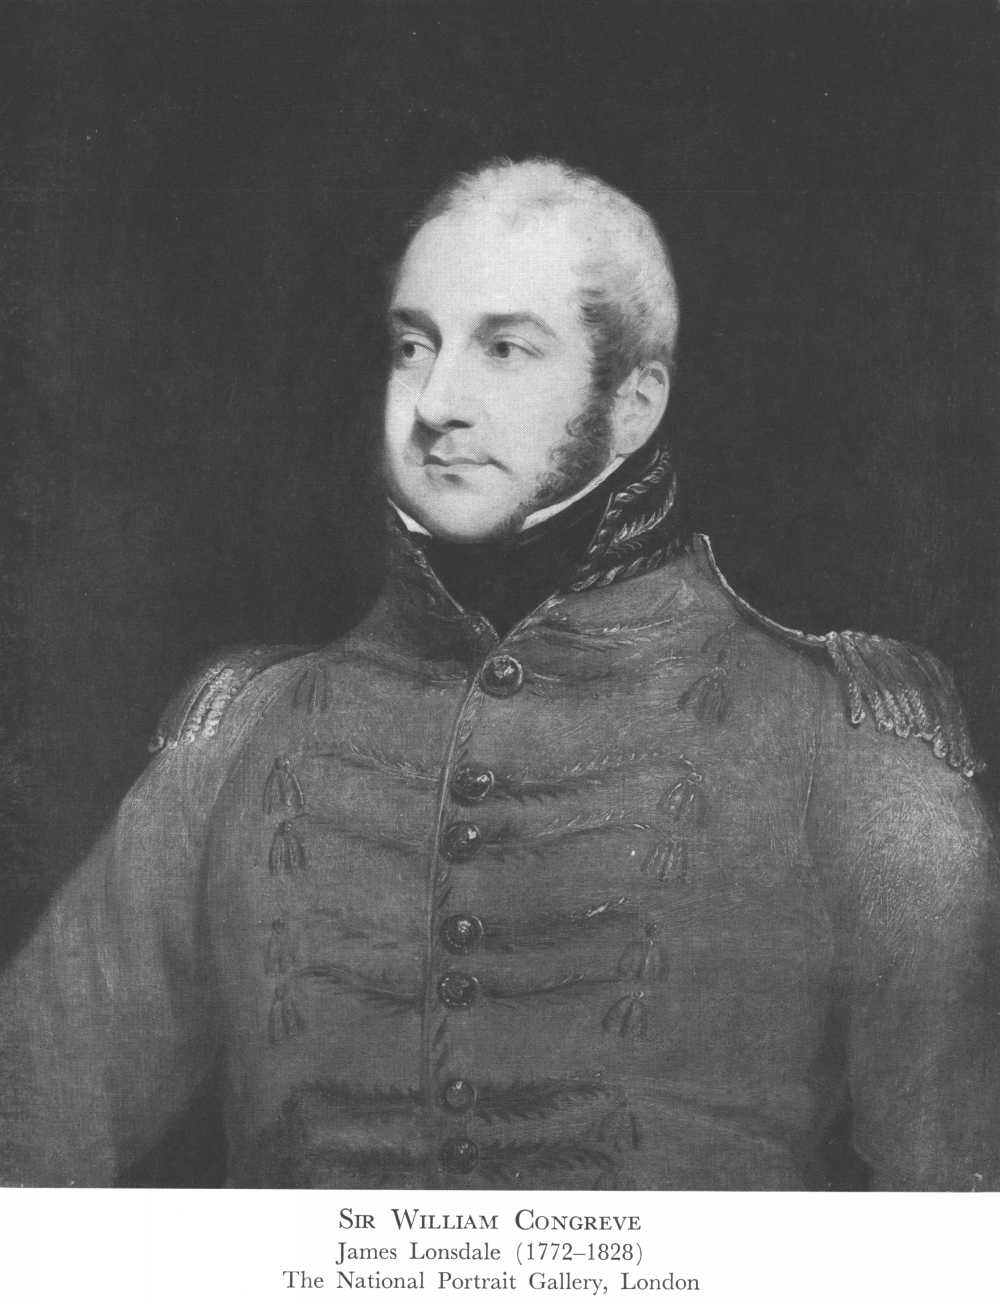 Sir William Congreve, by James Lonsdale